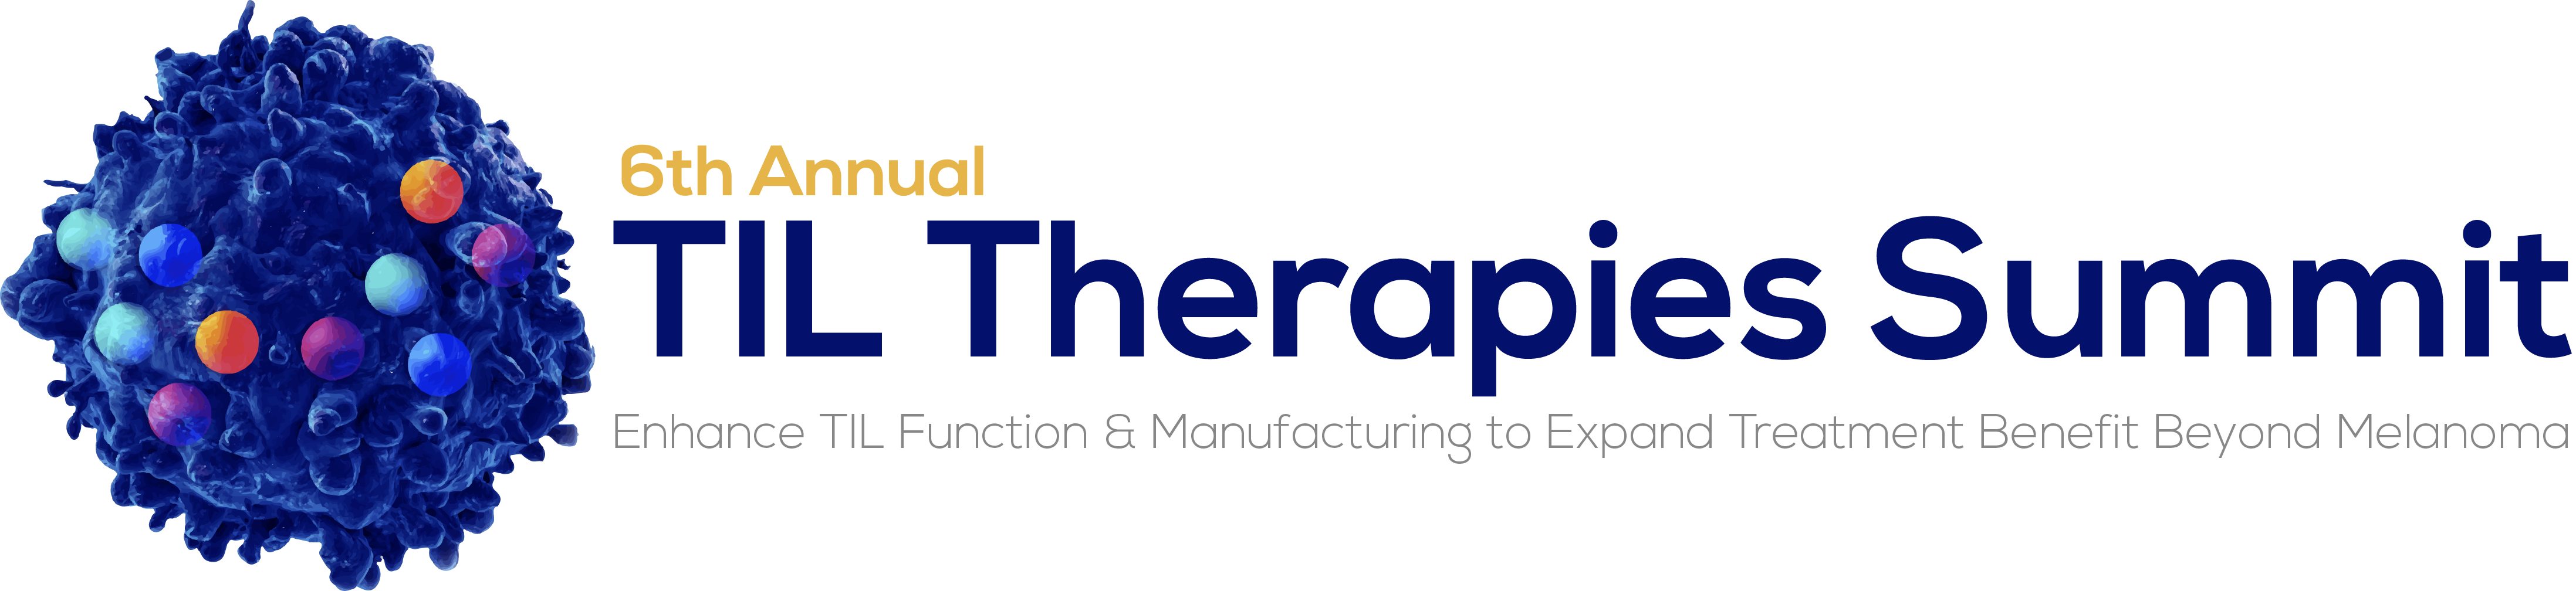 6th Annual TIL Therapies Summit